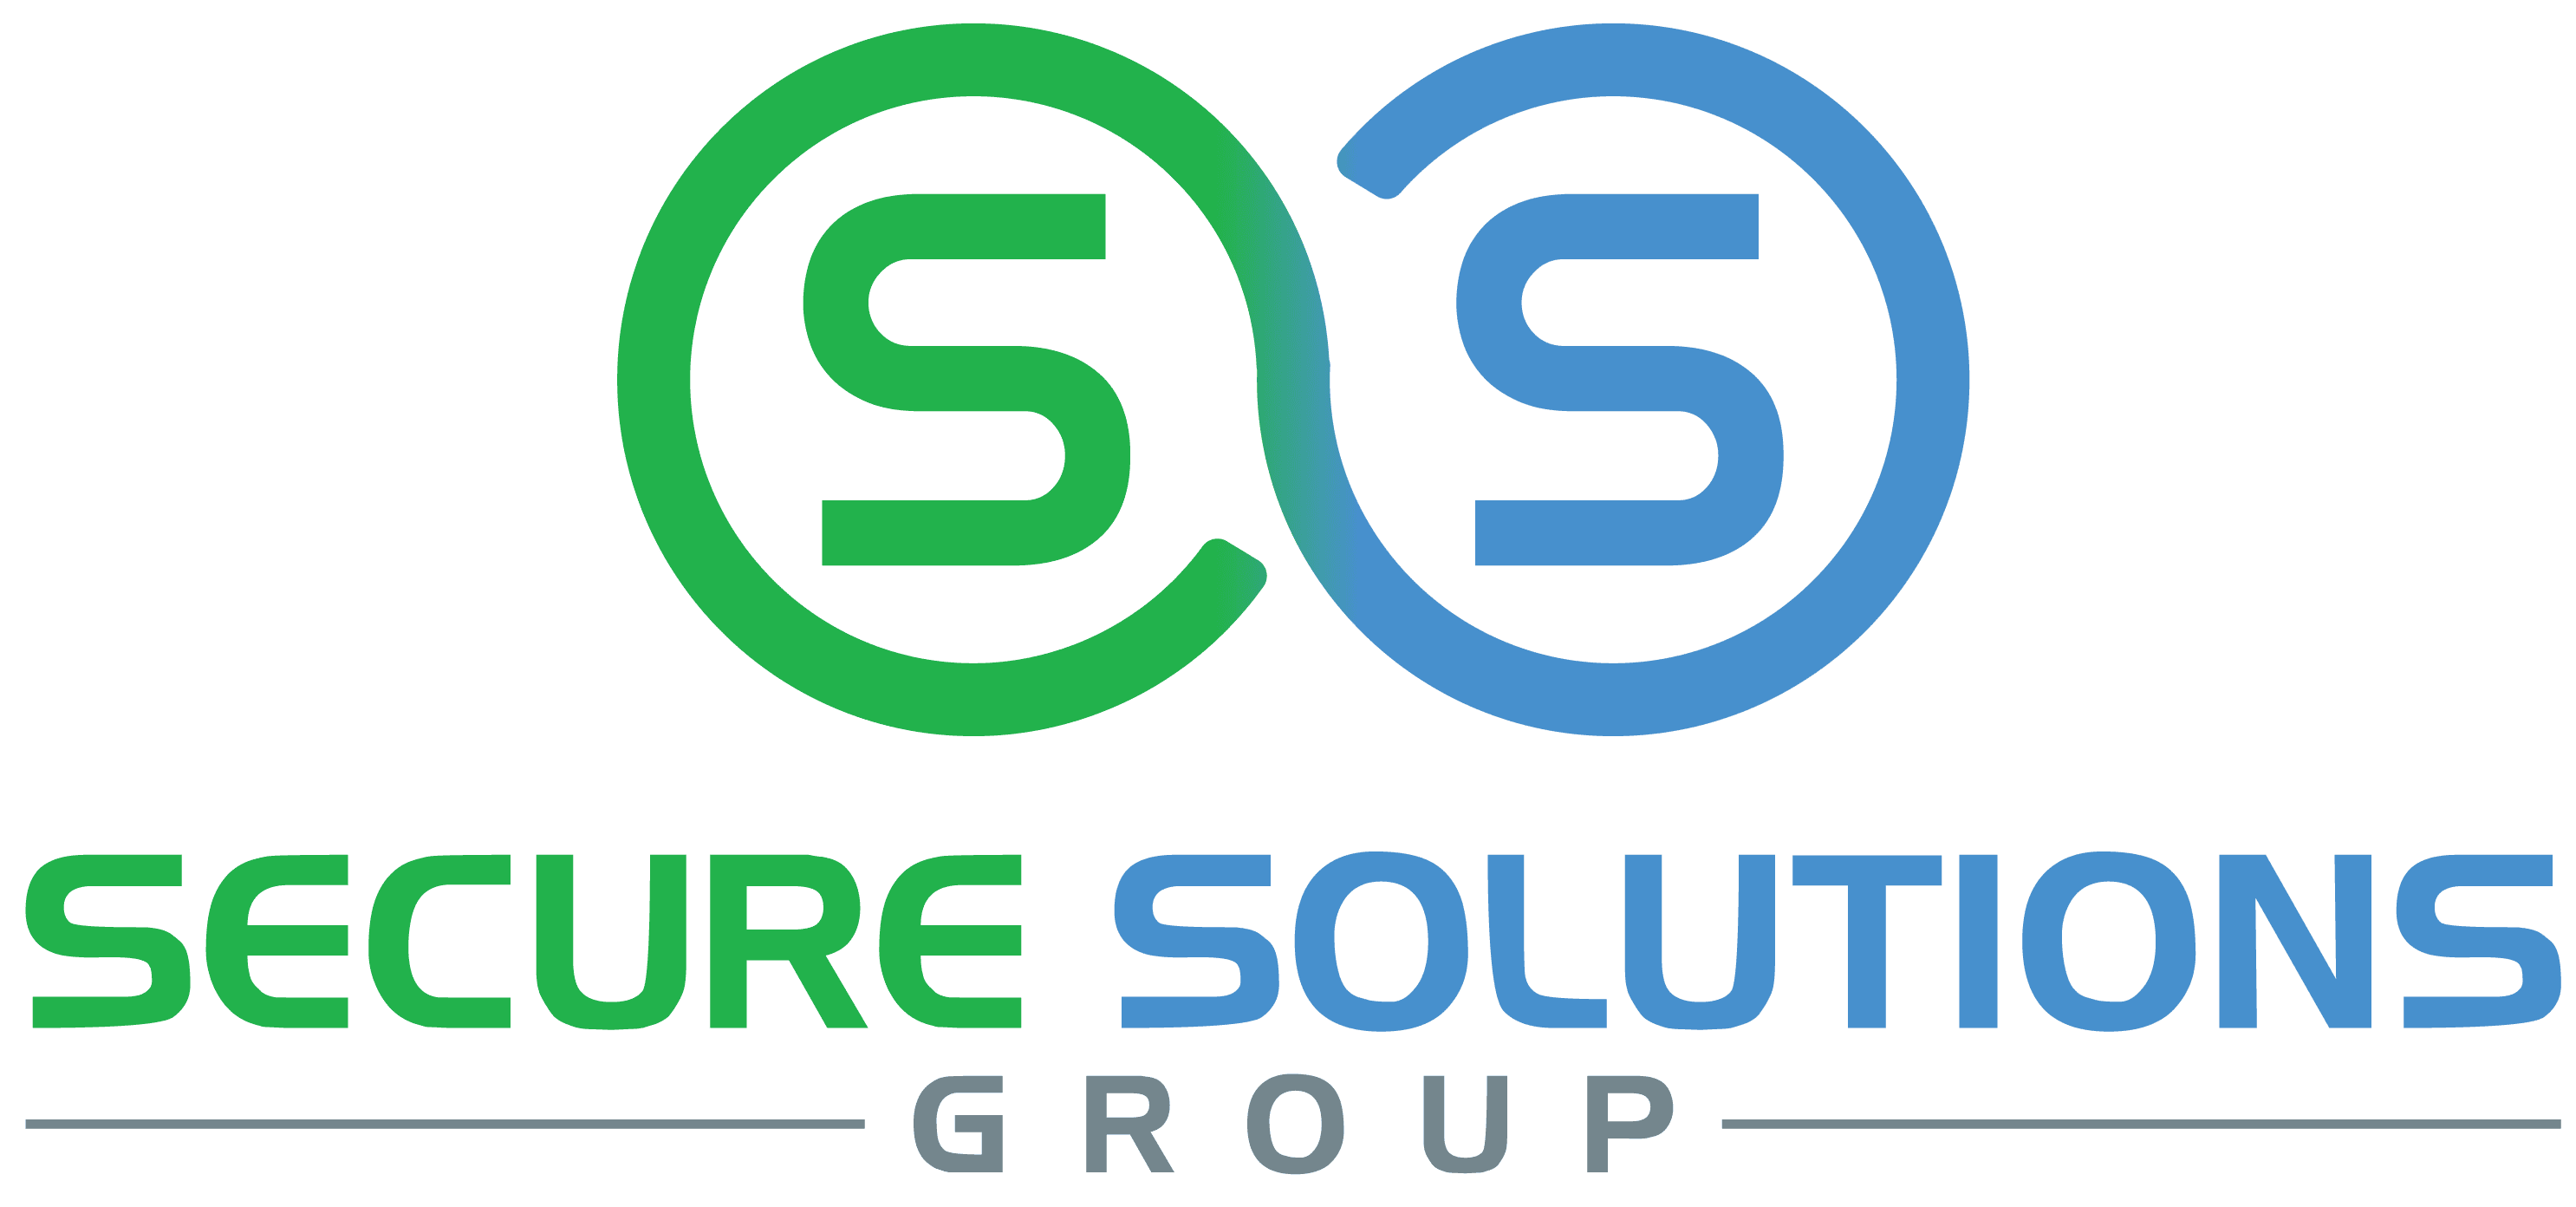 Secure Solutions Group